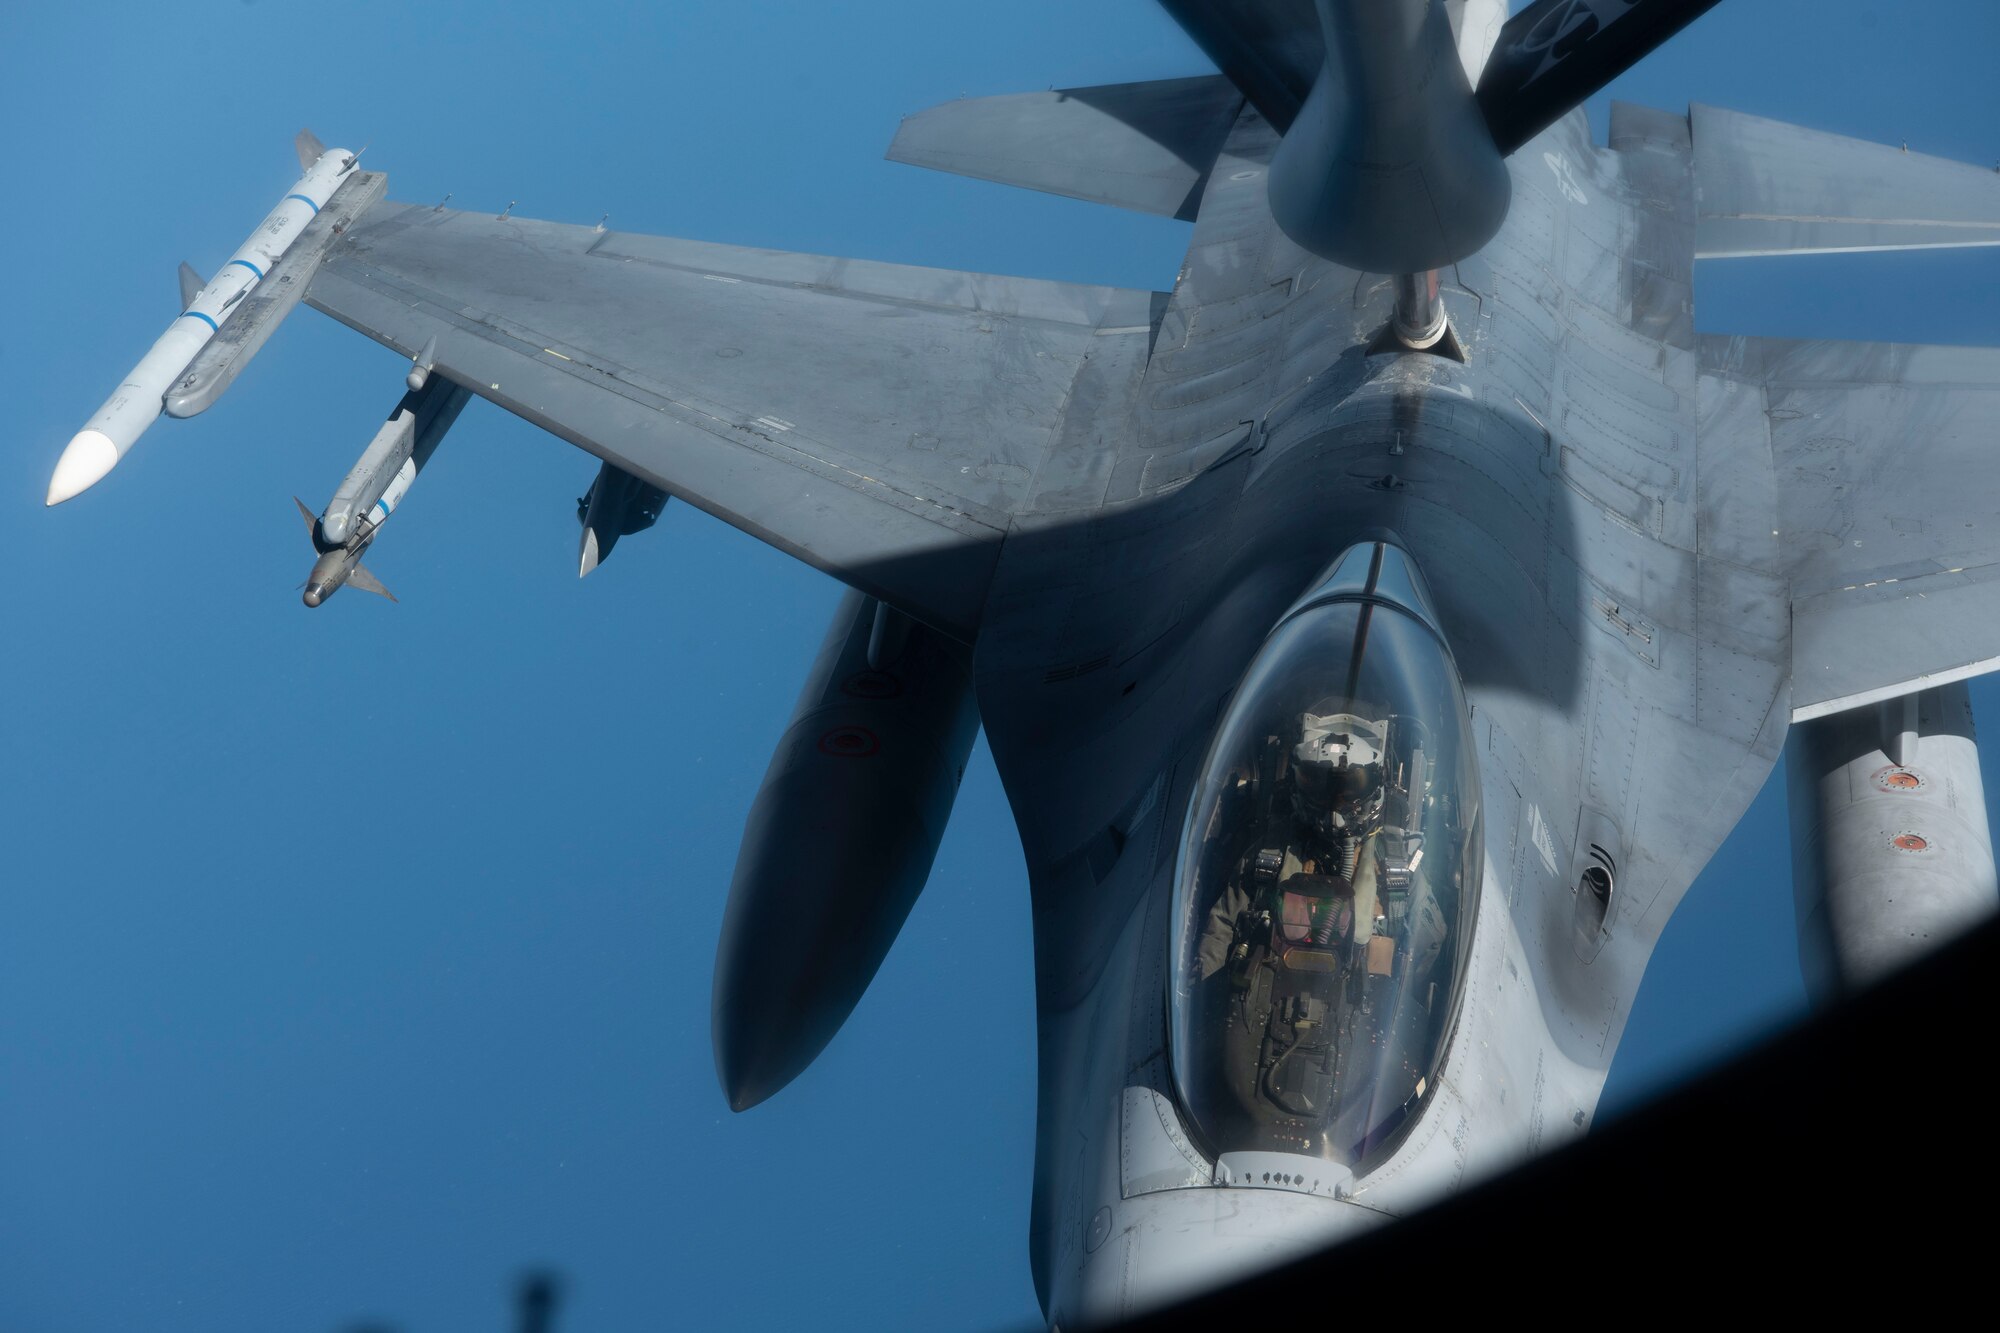 A U.S. Air Force F-16C Fighting Falcon aircraft assigned to the 31st Fighter Wing receives fuel over the North Sea from a KC-135 Stratotanker aircraft assigned to the 100th Air Refueling Wing, during exercise Cobra Warrior 22, Sept. 21, 2022. The exercise provides valuable opportunities for all participating forces to practice and develop tactics, techniques and procedures in complex scenarios. (U.S. Air Force photo by Tech. Sgt. Anthony Hetlage)